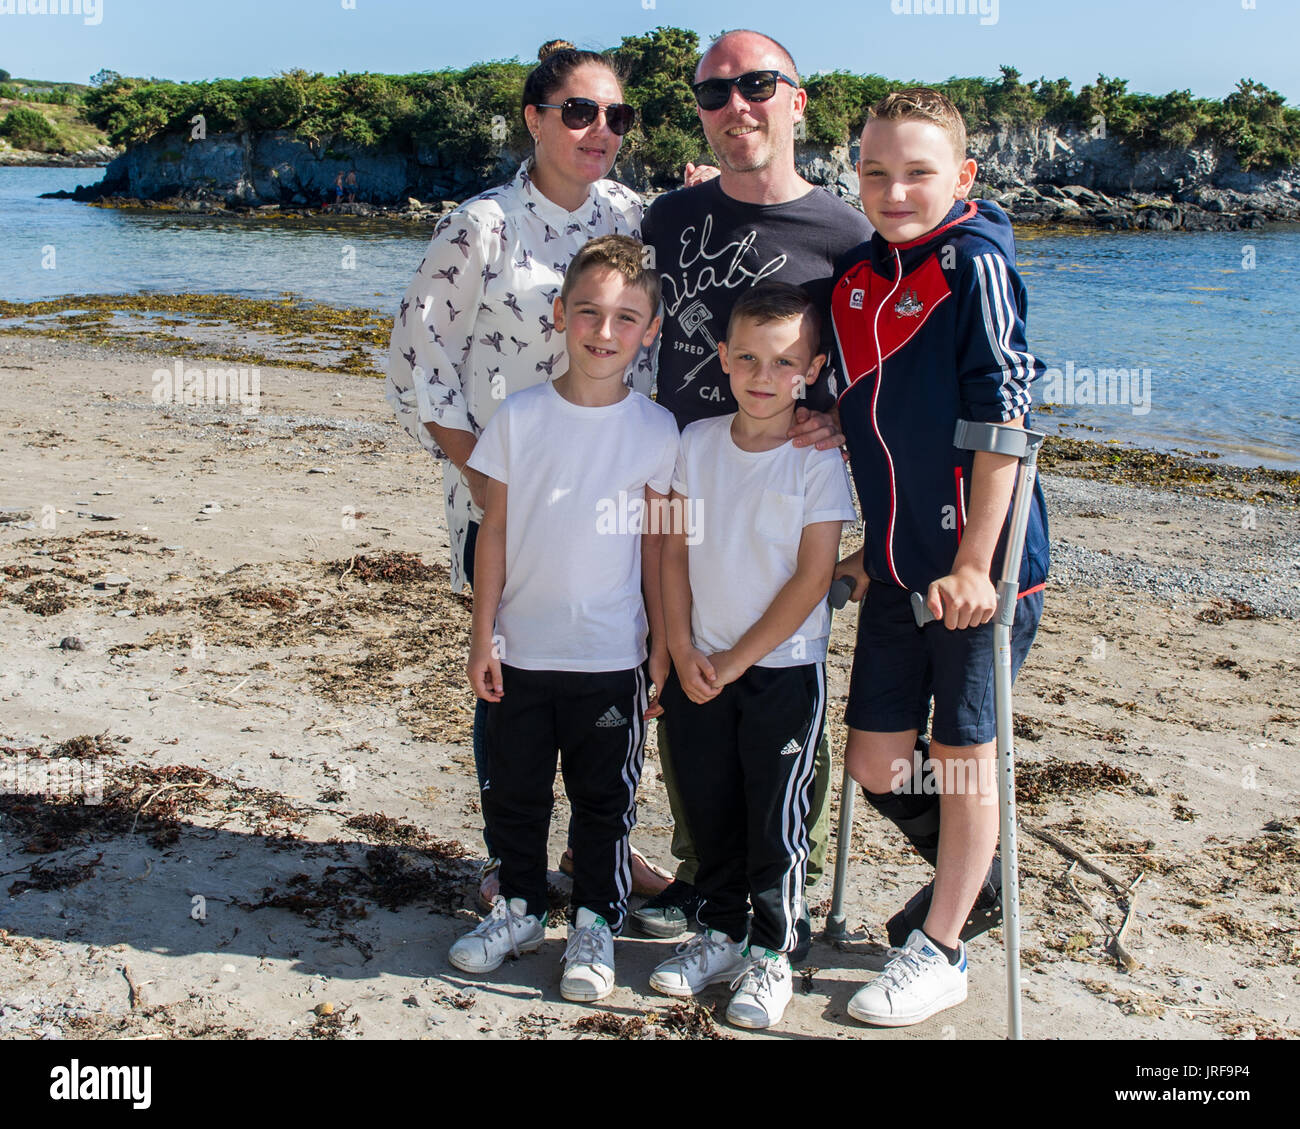 Schull, West Cork, Ireland. 5th Aug, 2017. The South West of Ireland has basked in sunshine over the last two days, with rain forecast from tomorrow and the rest of the week, families are taking the opportunity to hit the beaches.  Pictured at Schull beach are Heather, Liam, Anthony, Dara and Nathan Cronin frrom Ballingeary, West Cork.  Credit: Andy Gibson/Alamy Live News. Stock Photo